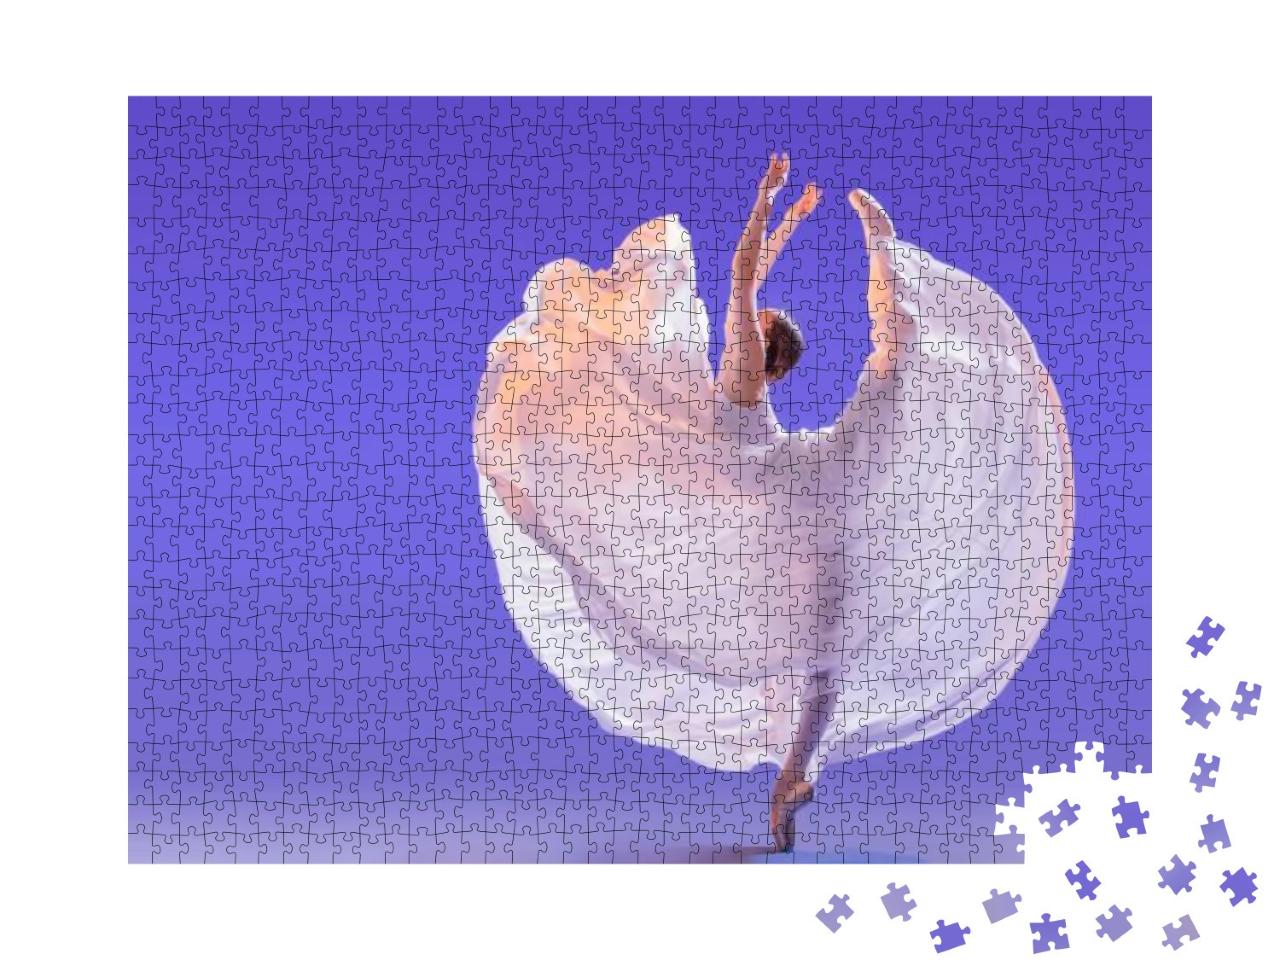 Elegant Ballerina in Pointe Shoes is Dancing in a Long Fl... Jigsaw Puzzle with 1000 pieces